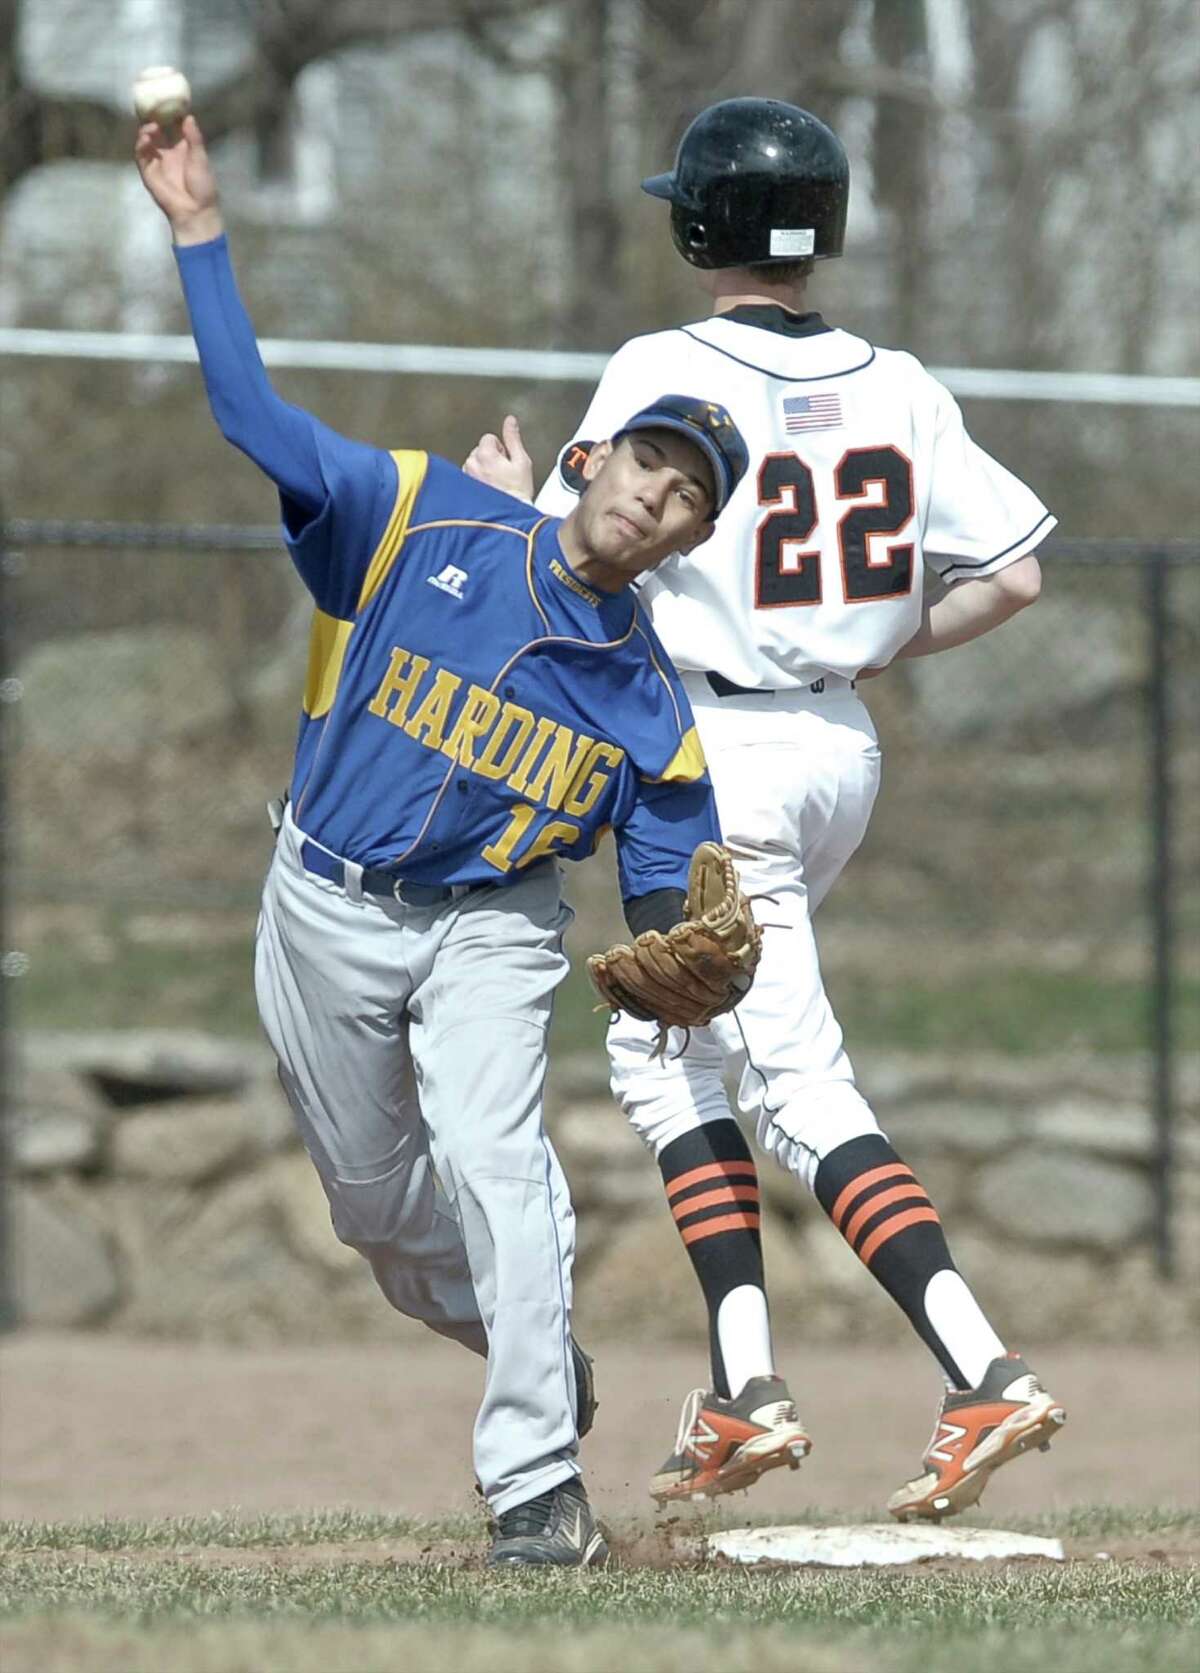 Harding's L. Hernandez (16) makes the throw to first but misses the double play after putting out Ridgefield's Craig Burke (22) at third during the boys high school baseball game between Harding and Ridgefield high schools, played at Ciuccoli Field in Ridgefield, Conn, on Wednesday, April 15, 2015.